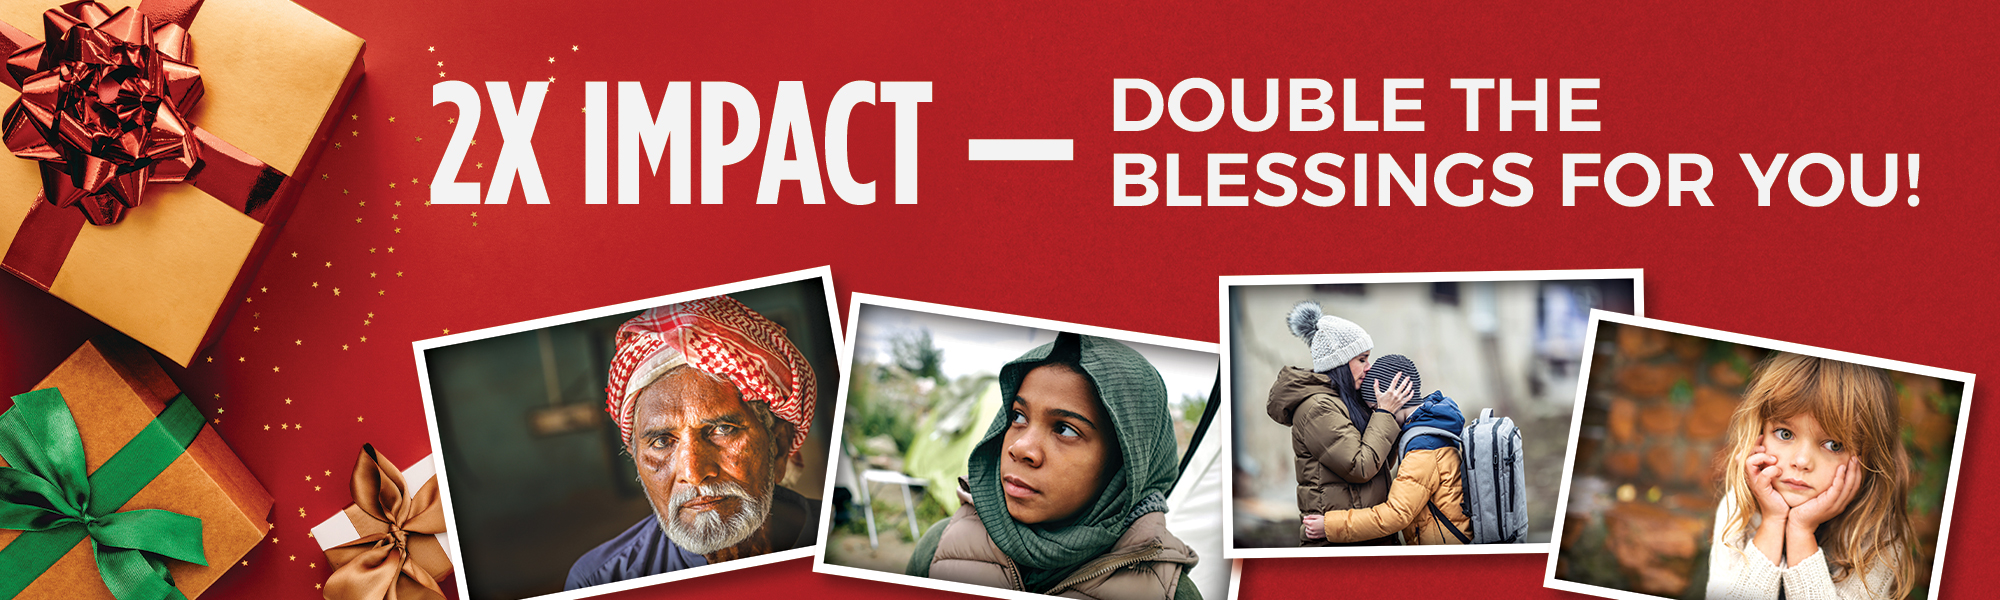 2X Impact - Double the Blessings For You!